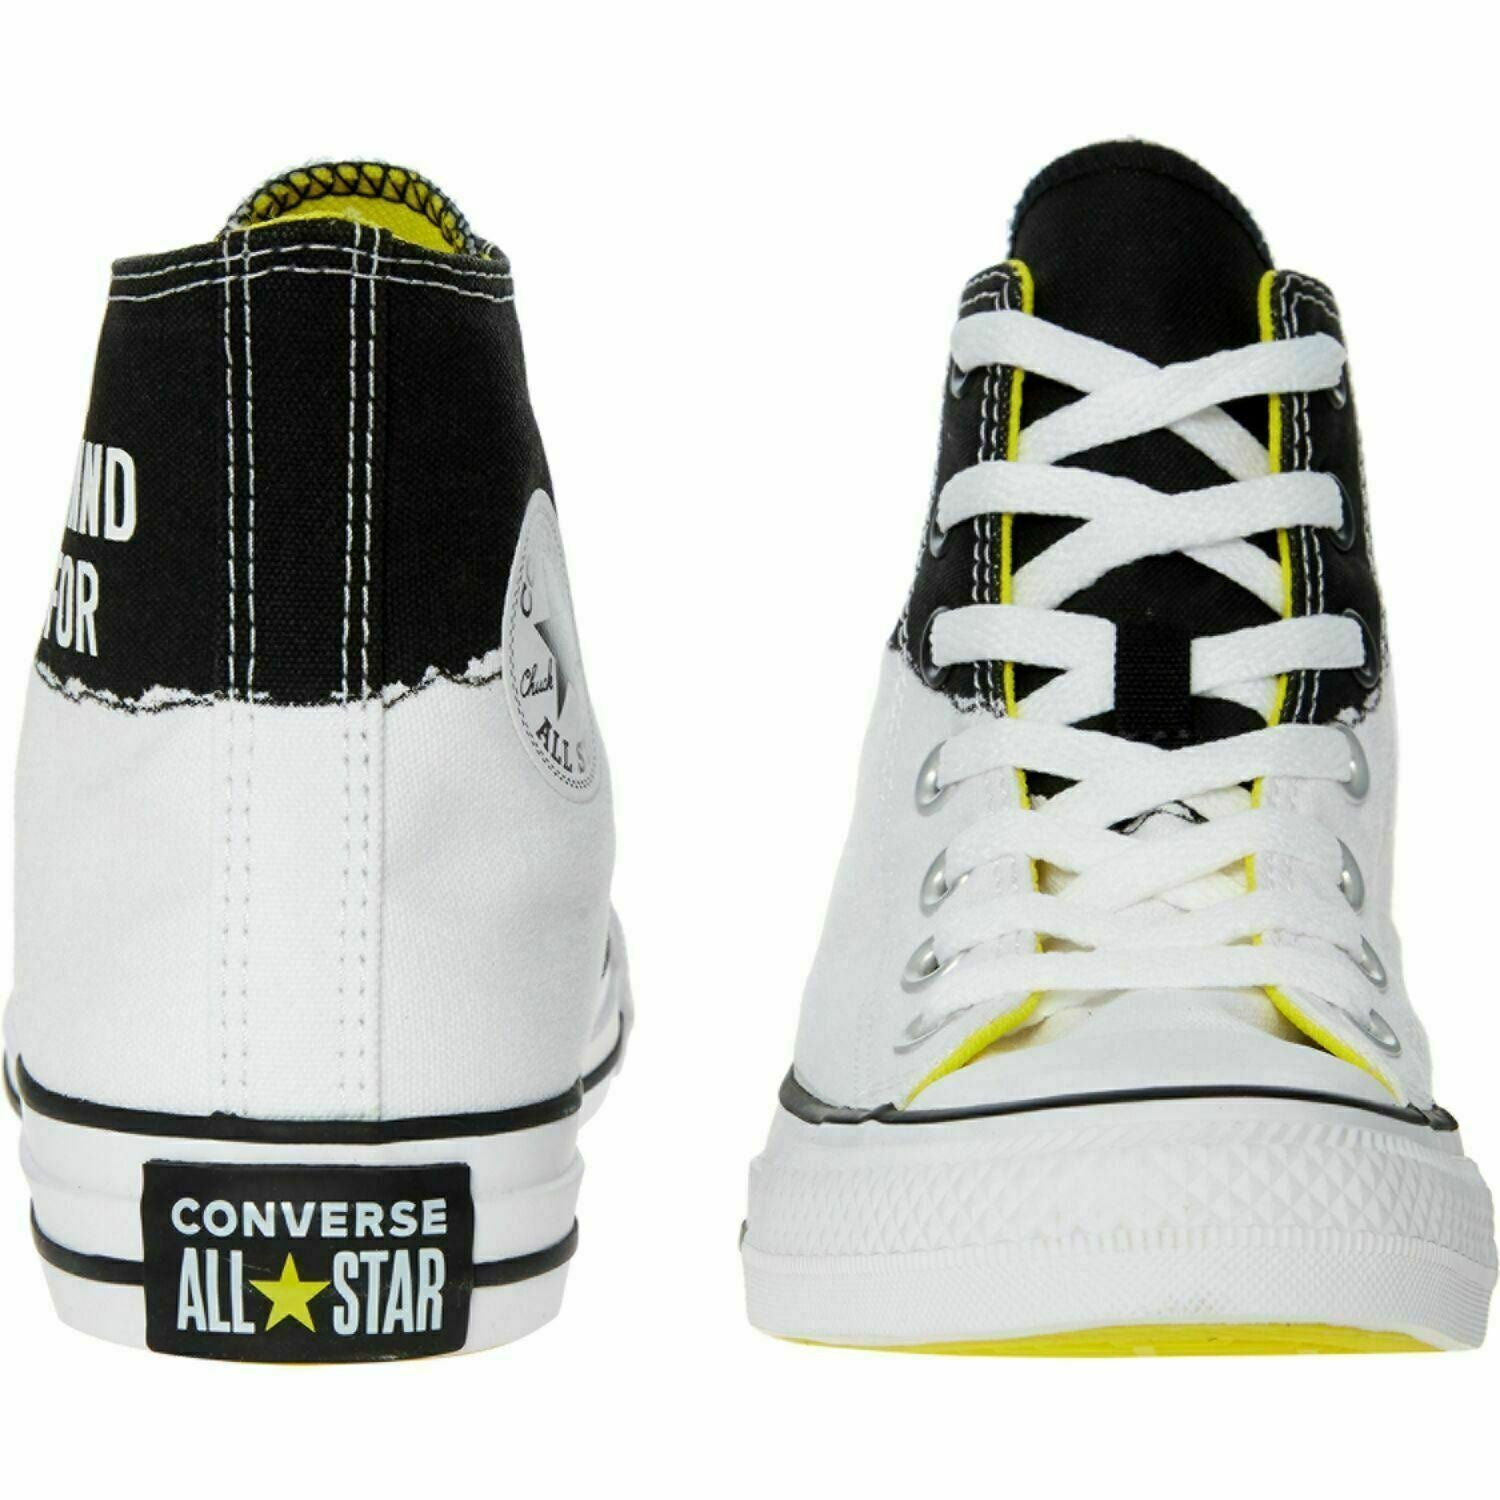 Women's Converse CTAS Hi 'I Stand For' Black and White Trainers UK 3 EUR 35 US5